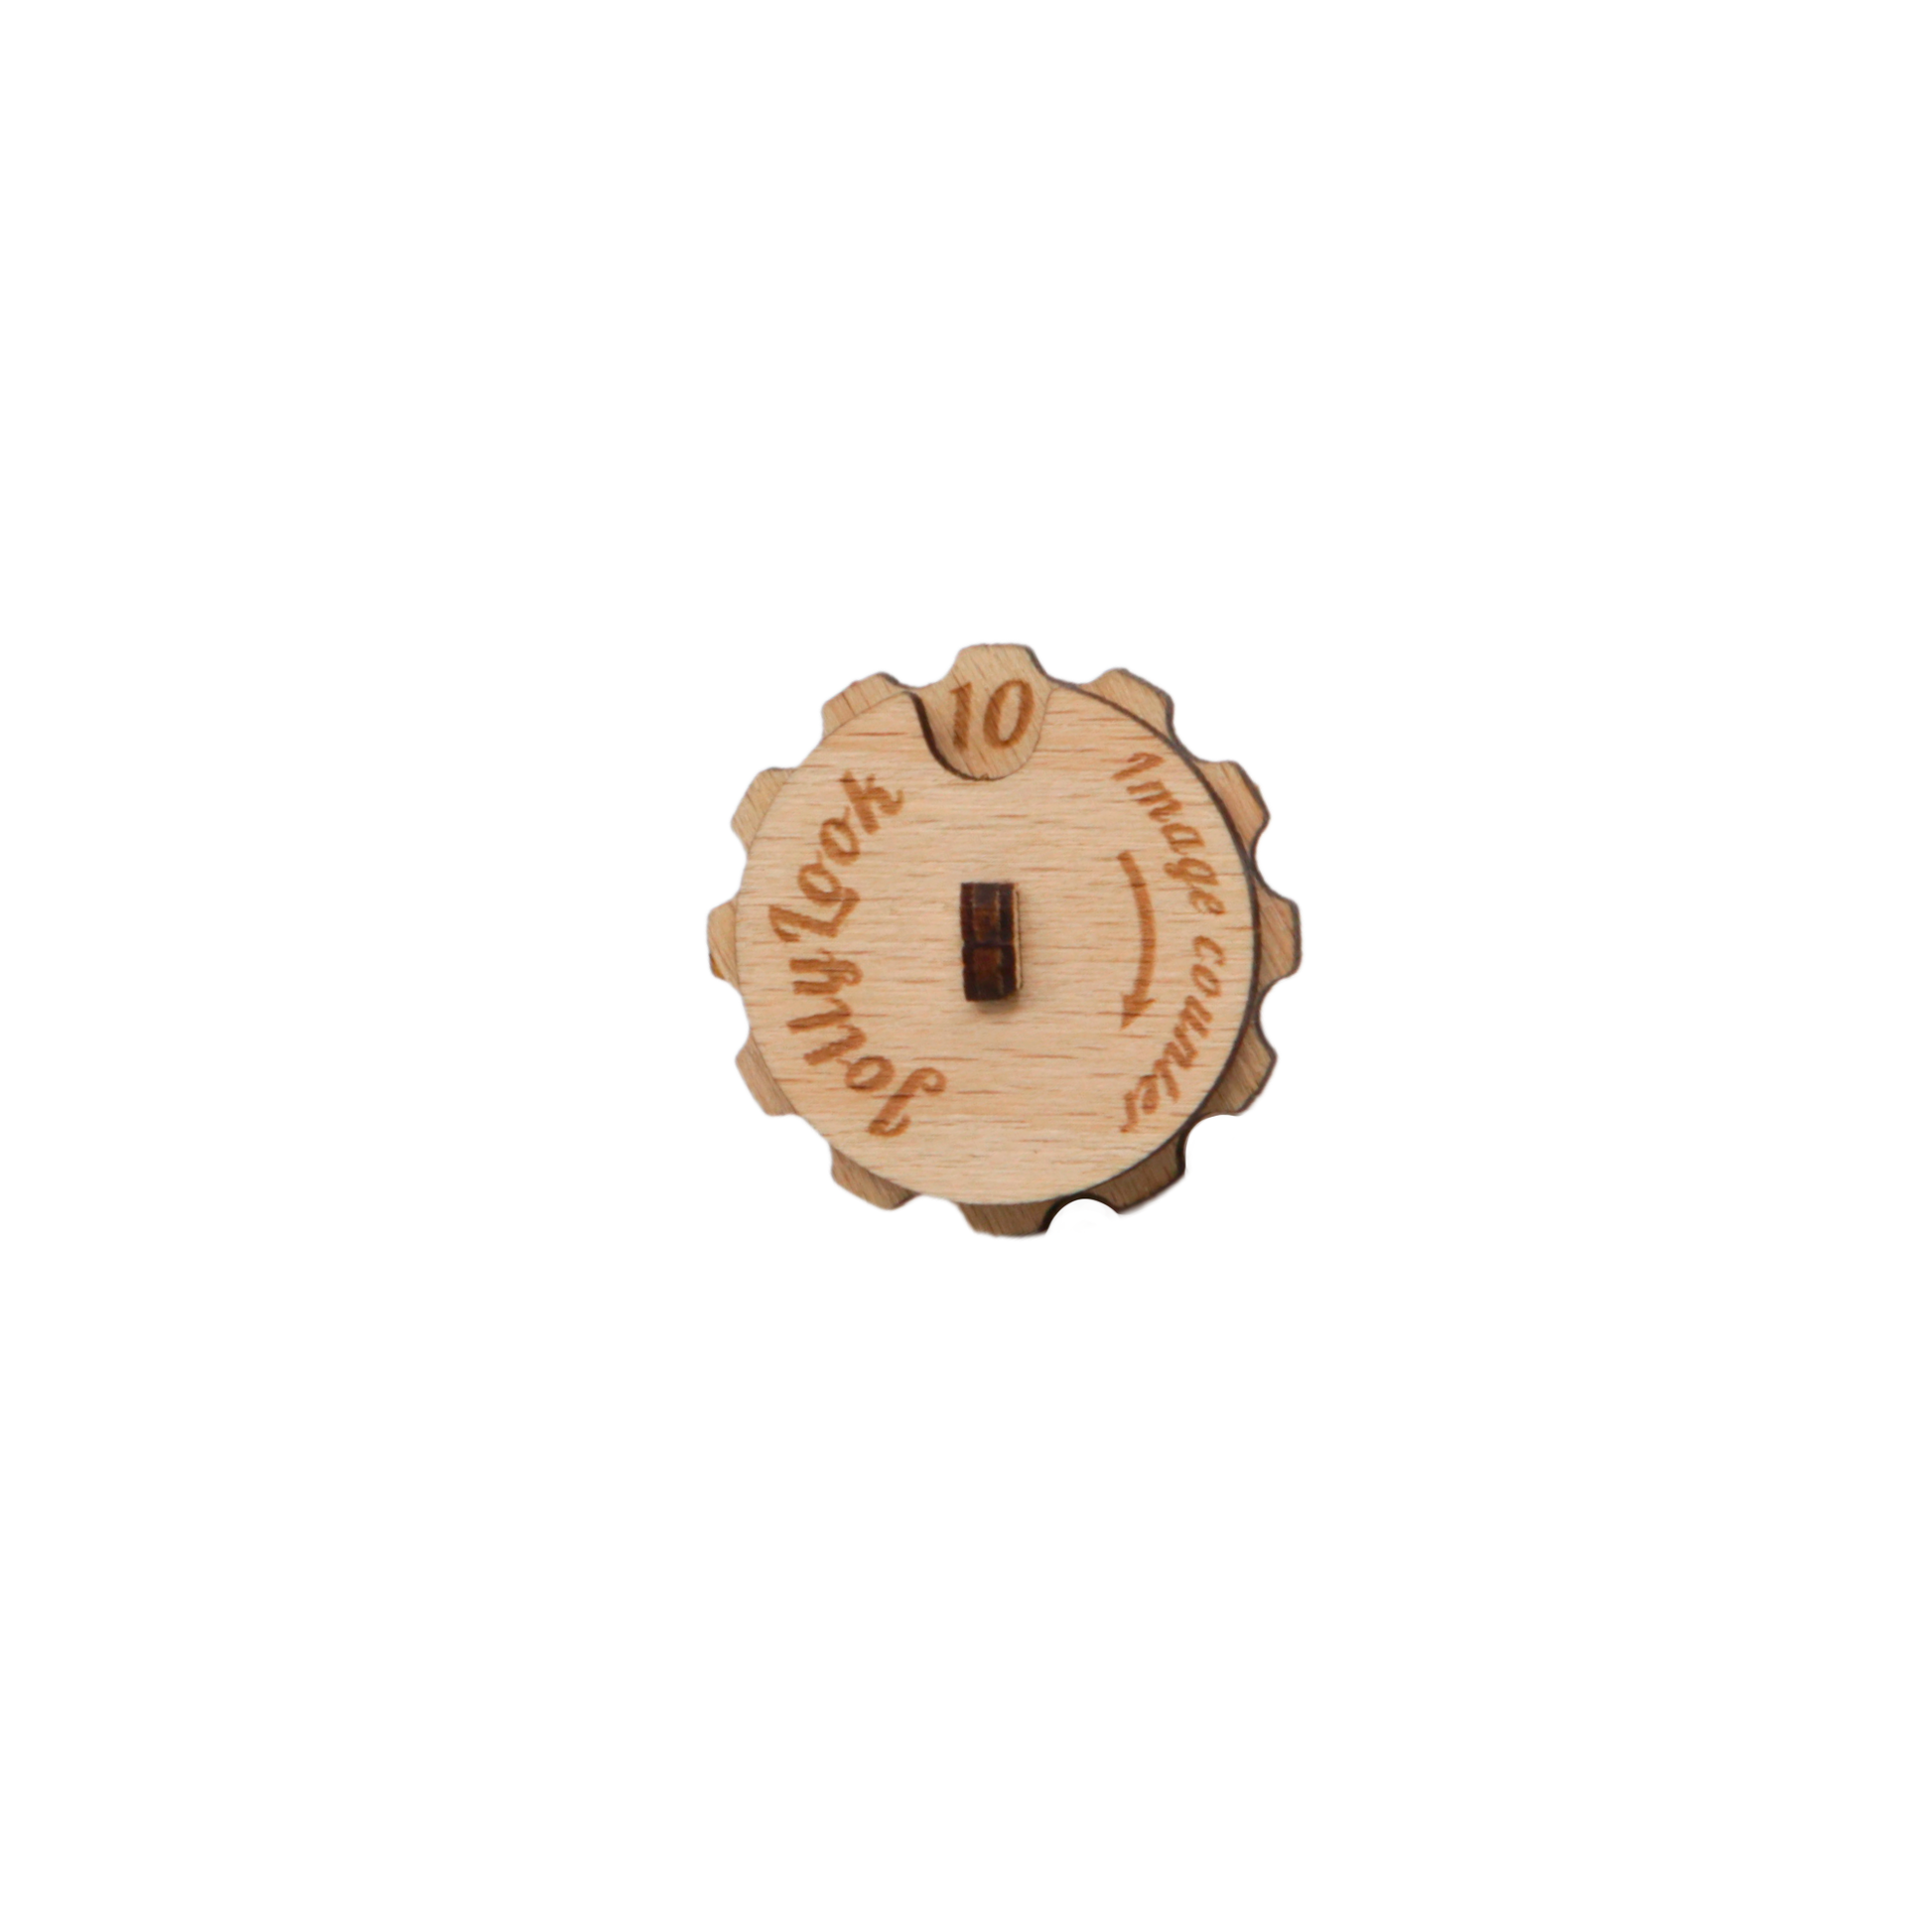 A round wooden image counter in Natural Wood Color featuring the Jollylook logo for keeping track of how many images remain in your Instax film cartridge